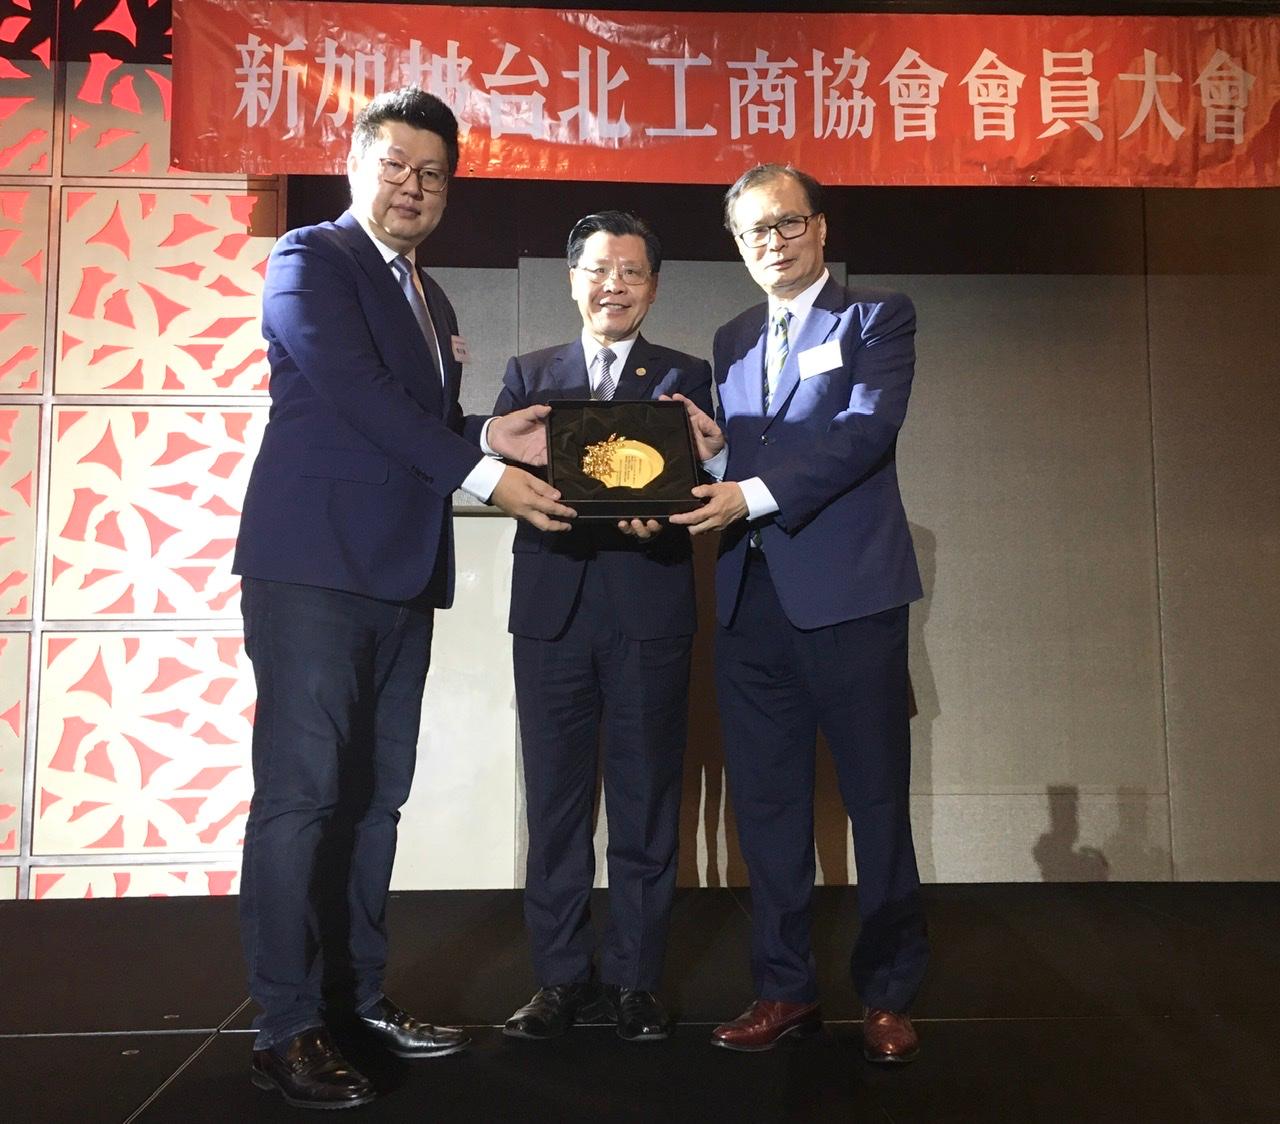 Representative Francis Liang (center) witnessing the presentation of a memento by Mr. James Yang, the newly elected Taipei Business Association in Singapore President to his predecessor, Mr. Shih Chih Lung. (2020/01/18)